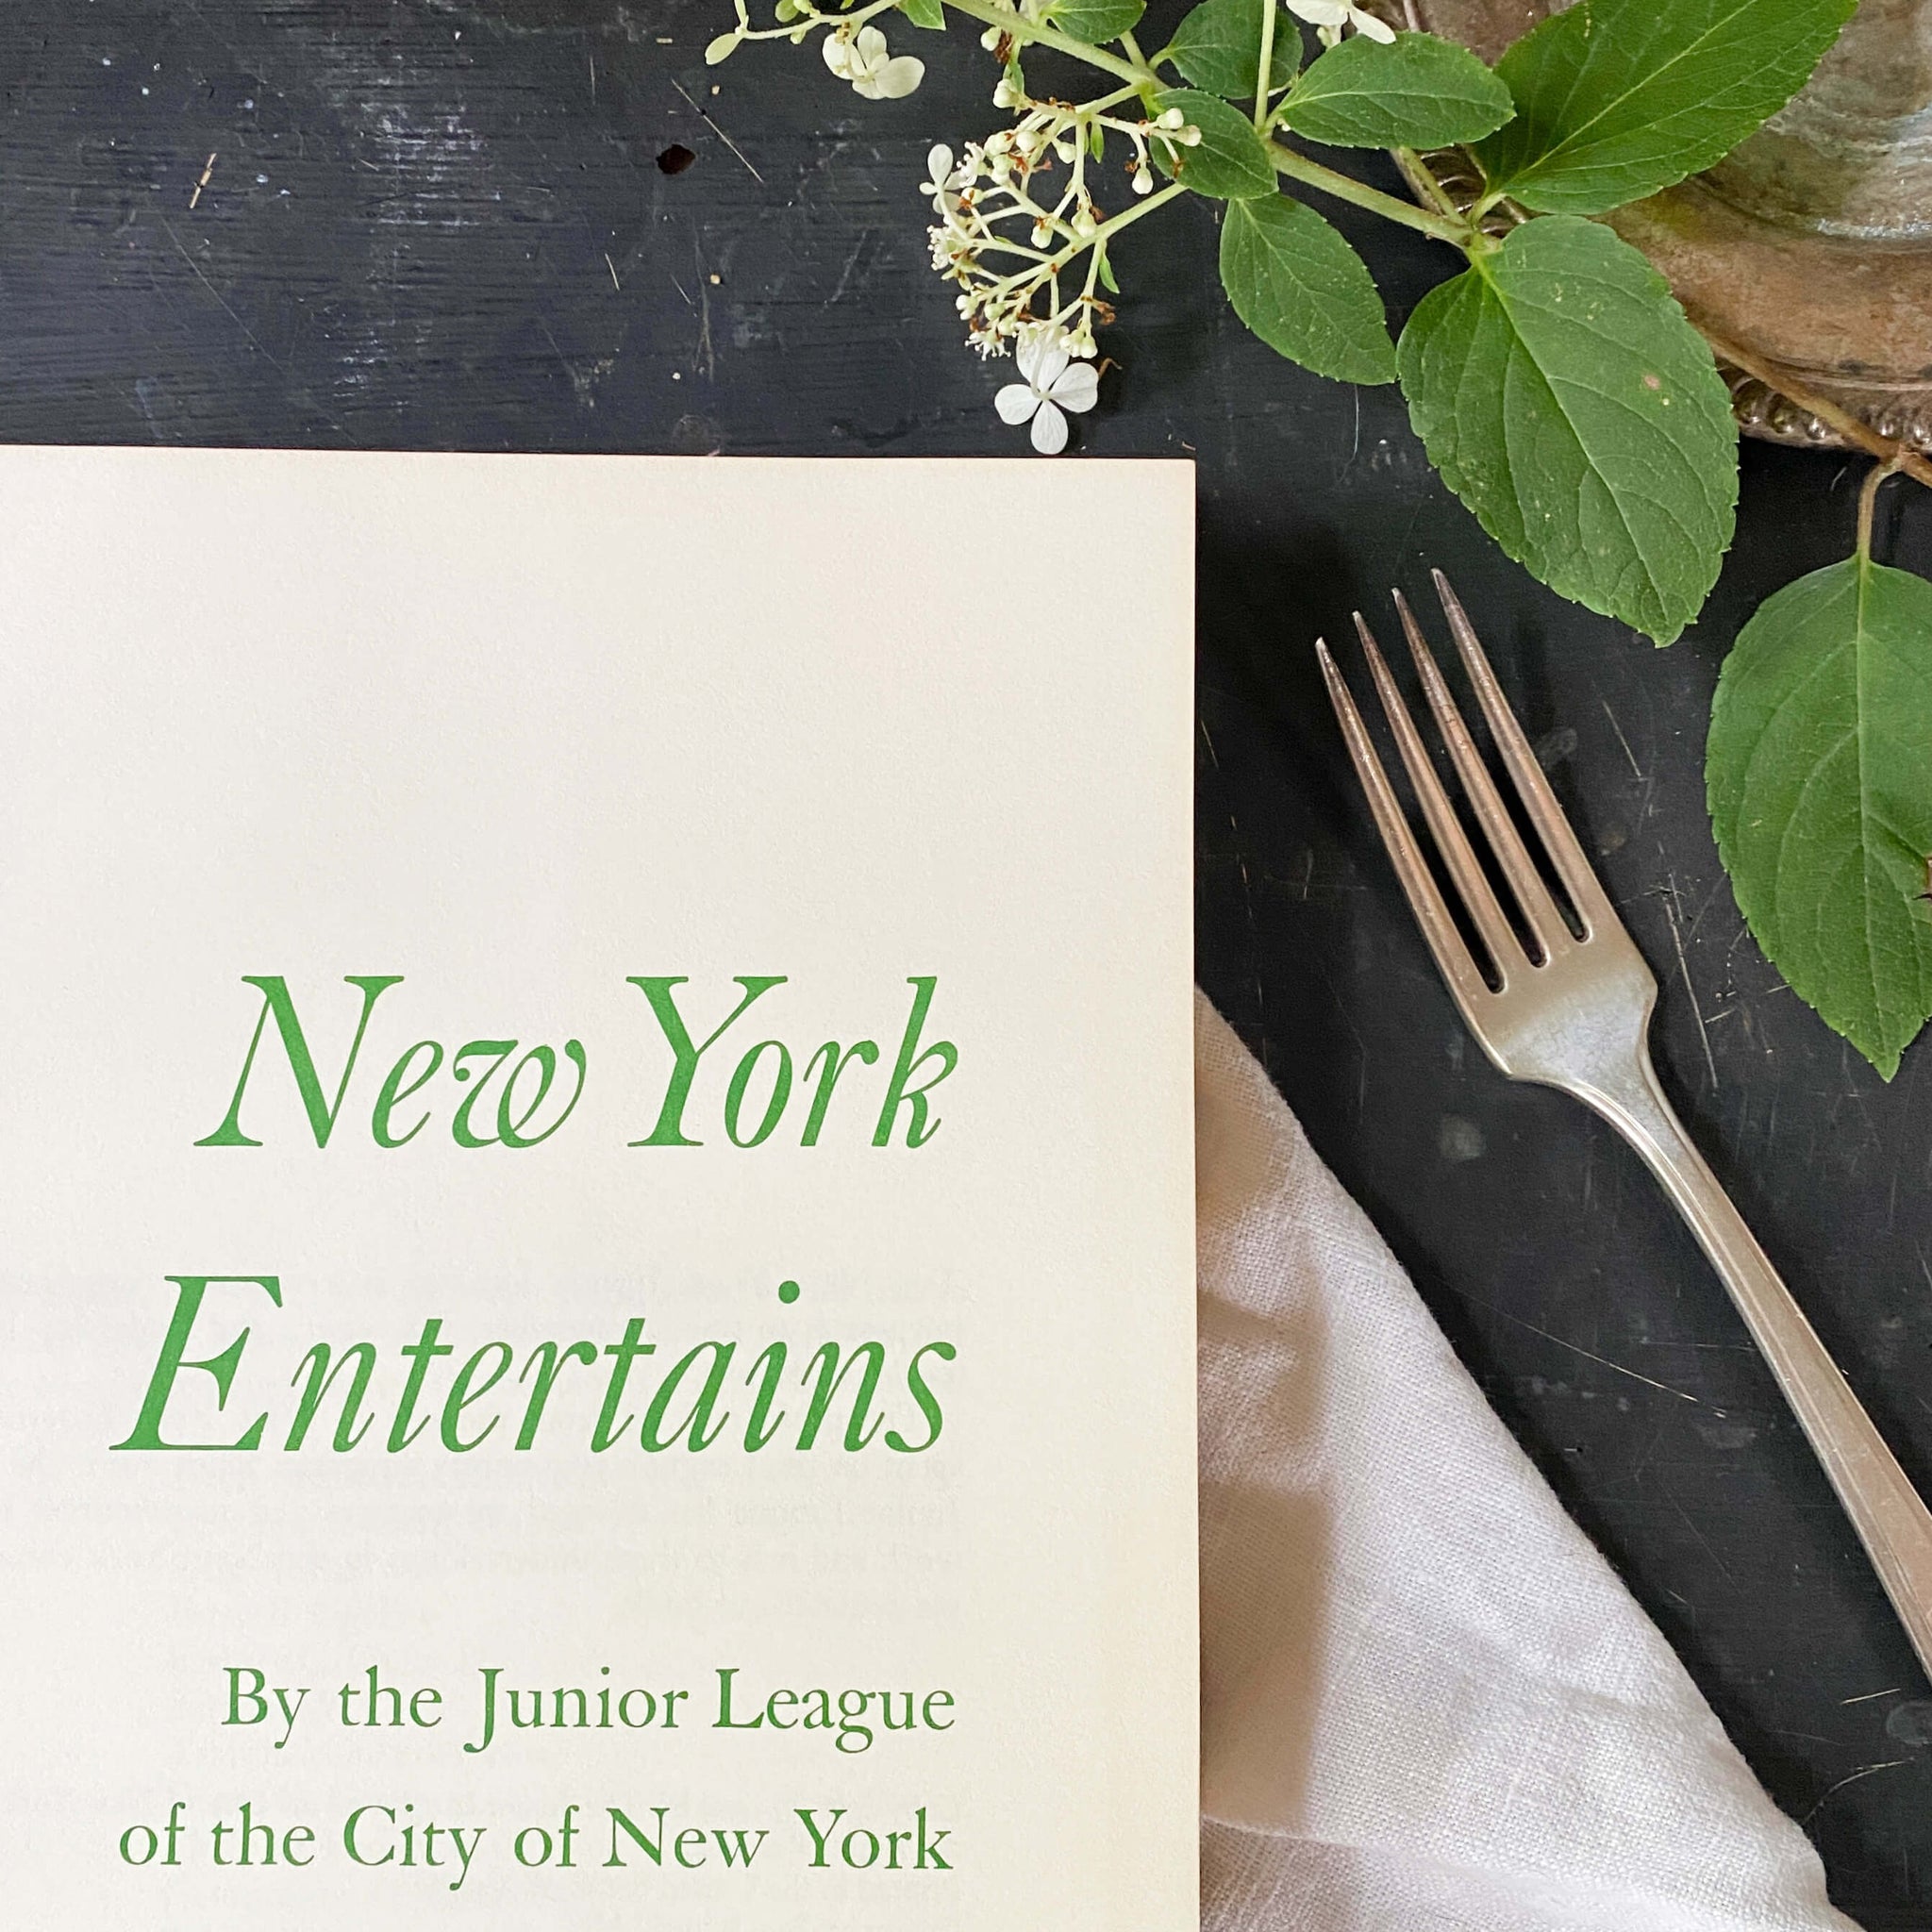 New York Entertains - The Junior League of New York City Cookbook - 1974 First Edition